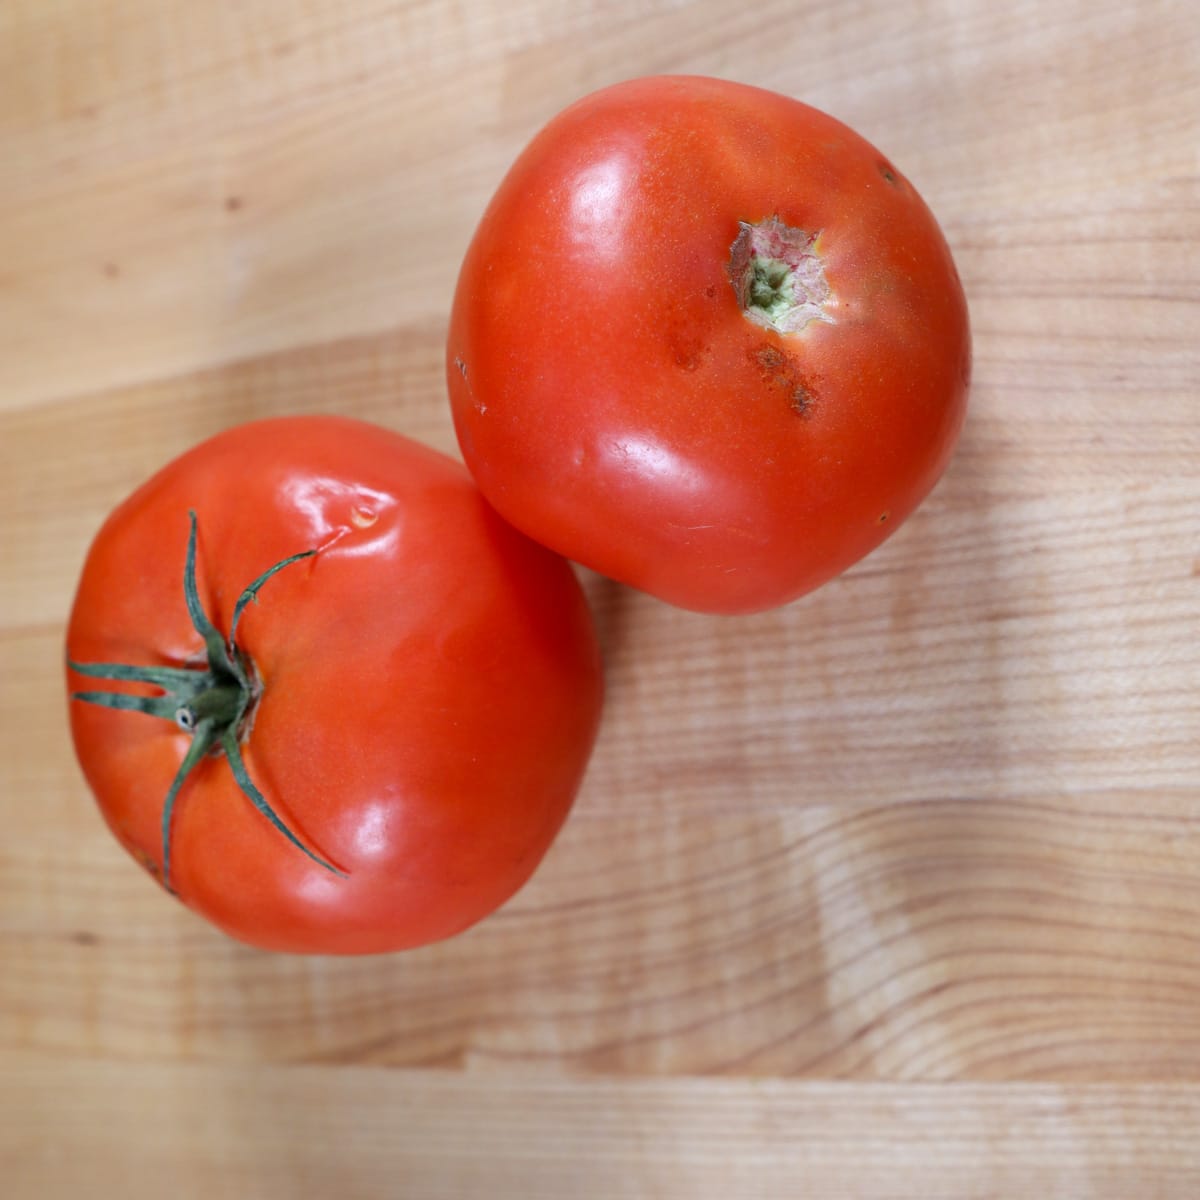 How to Tell if a Tomato is Bad?